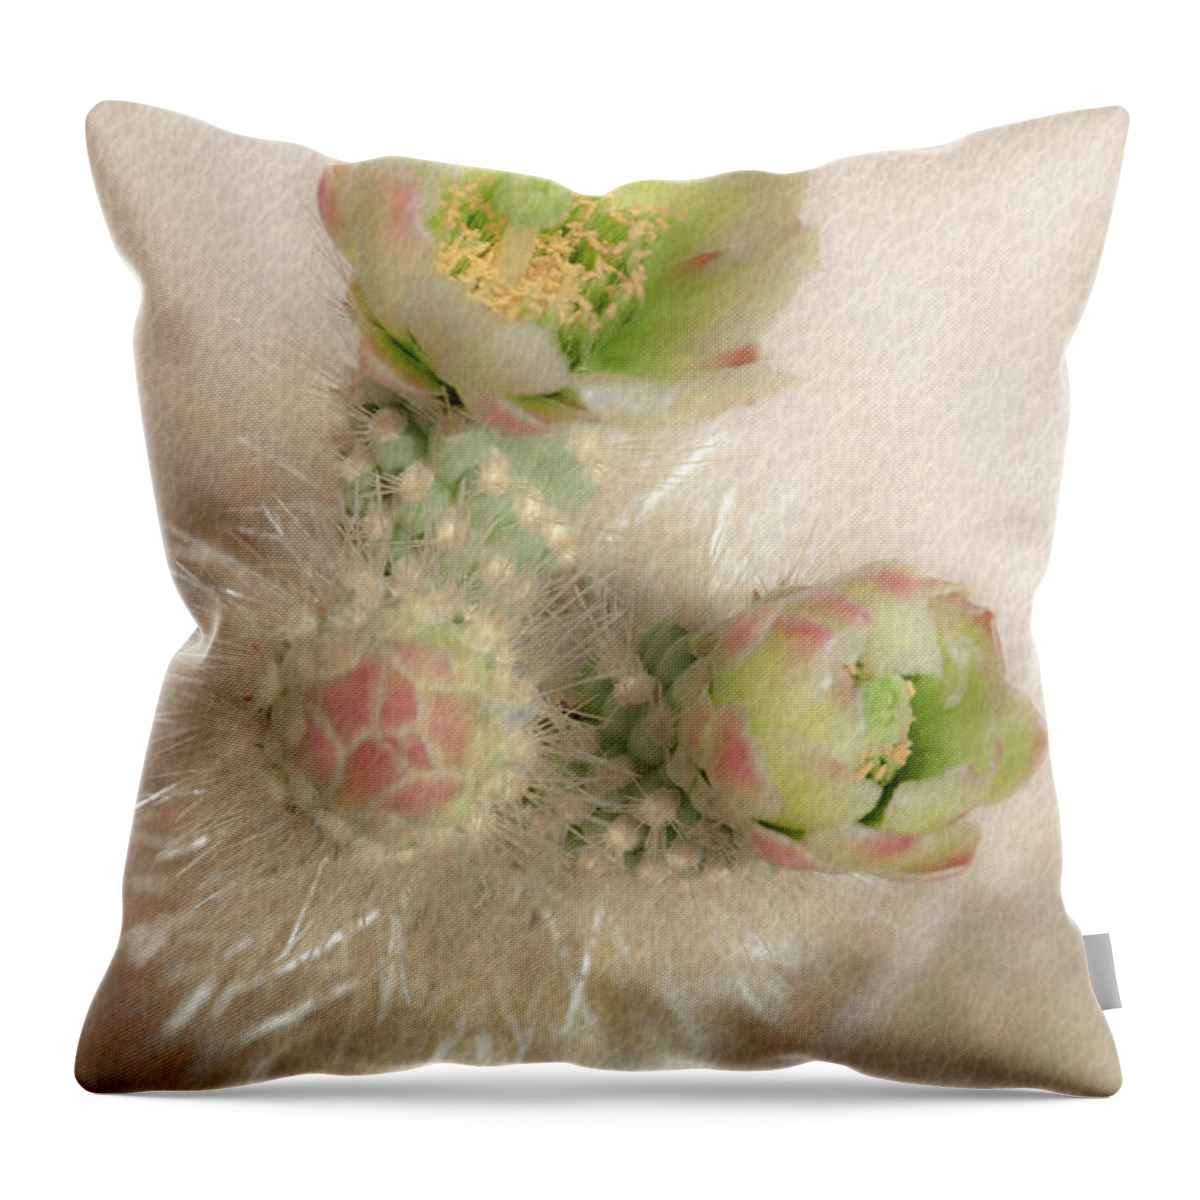 Cactus Throw Pillow featuring the photograph 1629 Watercolor Cactus Blossom by Kenneth Johnson